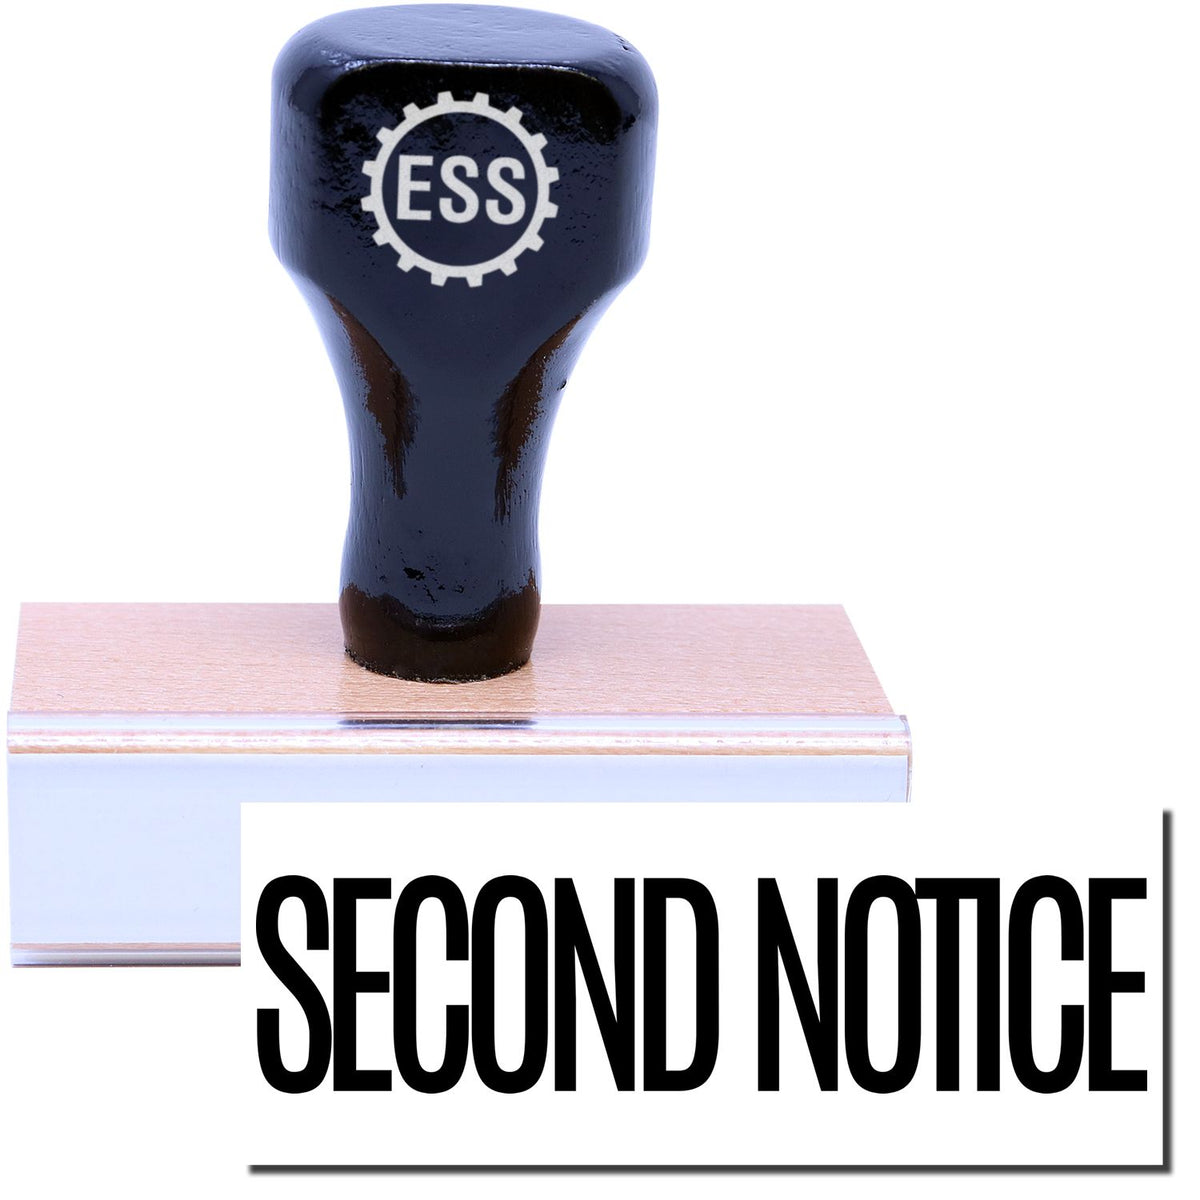 A stock office rubber stamp with a stamped image showing how the text &quot;SECOND NOTICE &quot; in a large narrow font is displayed after stamping.